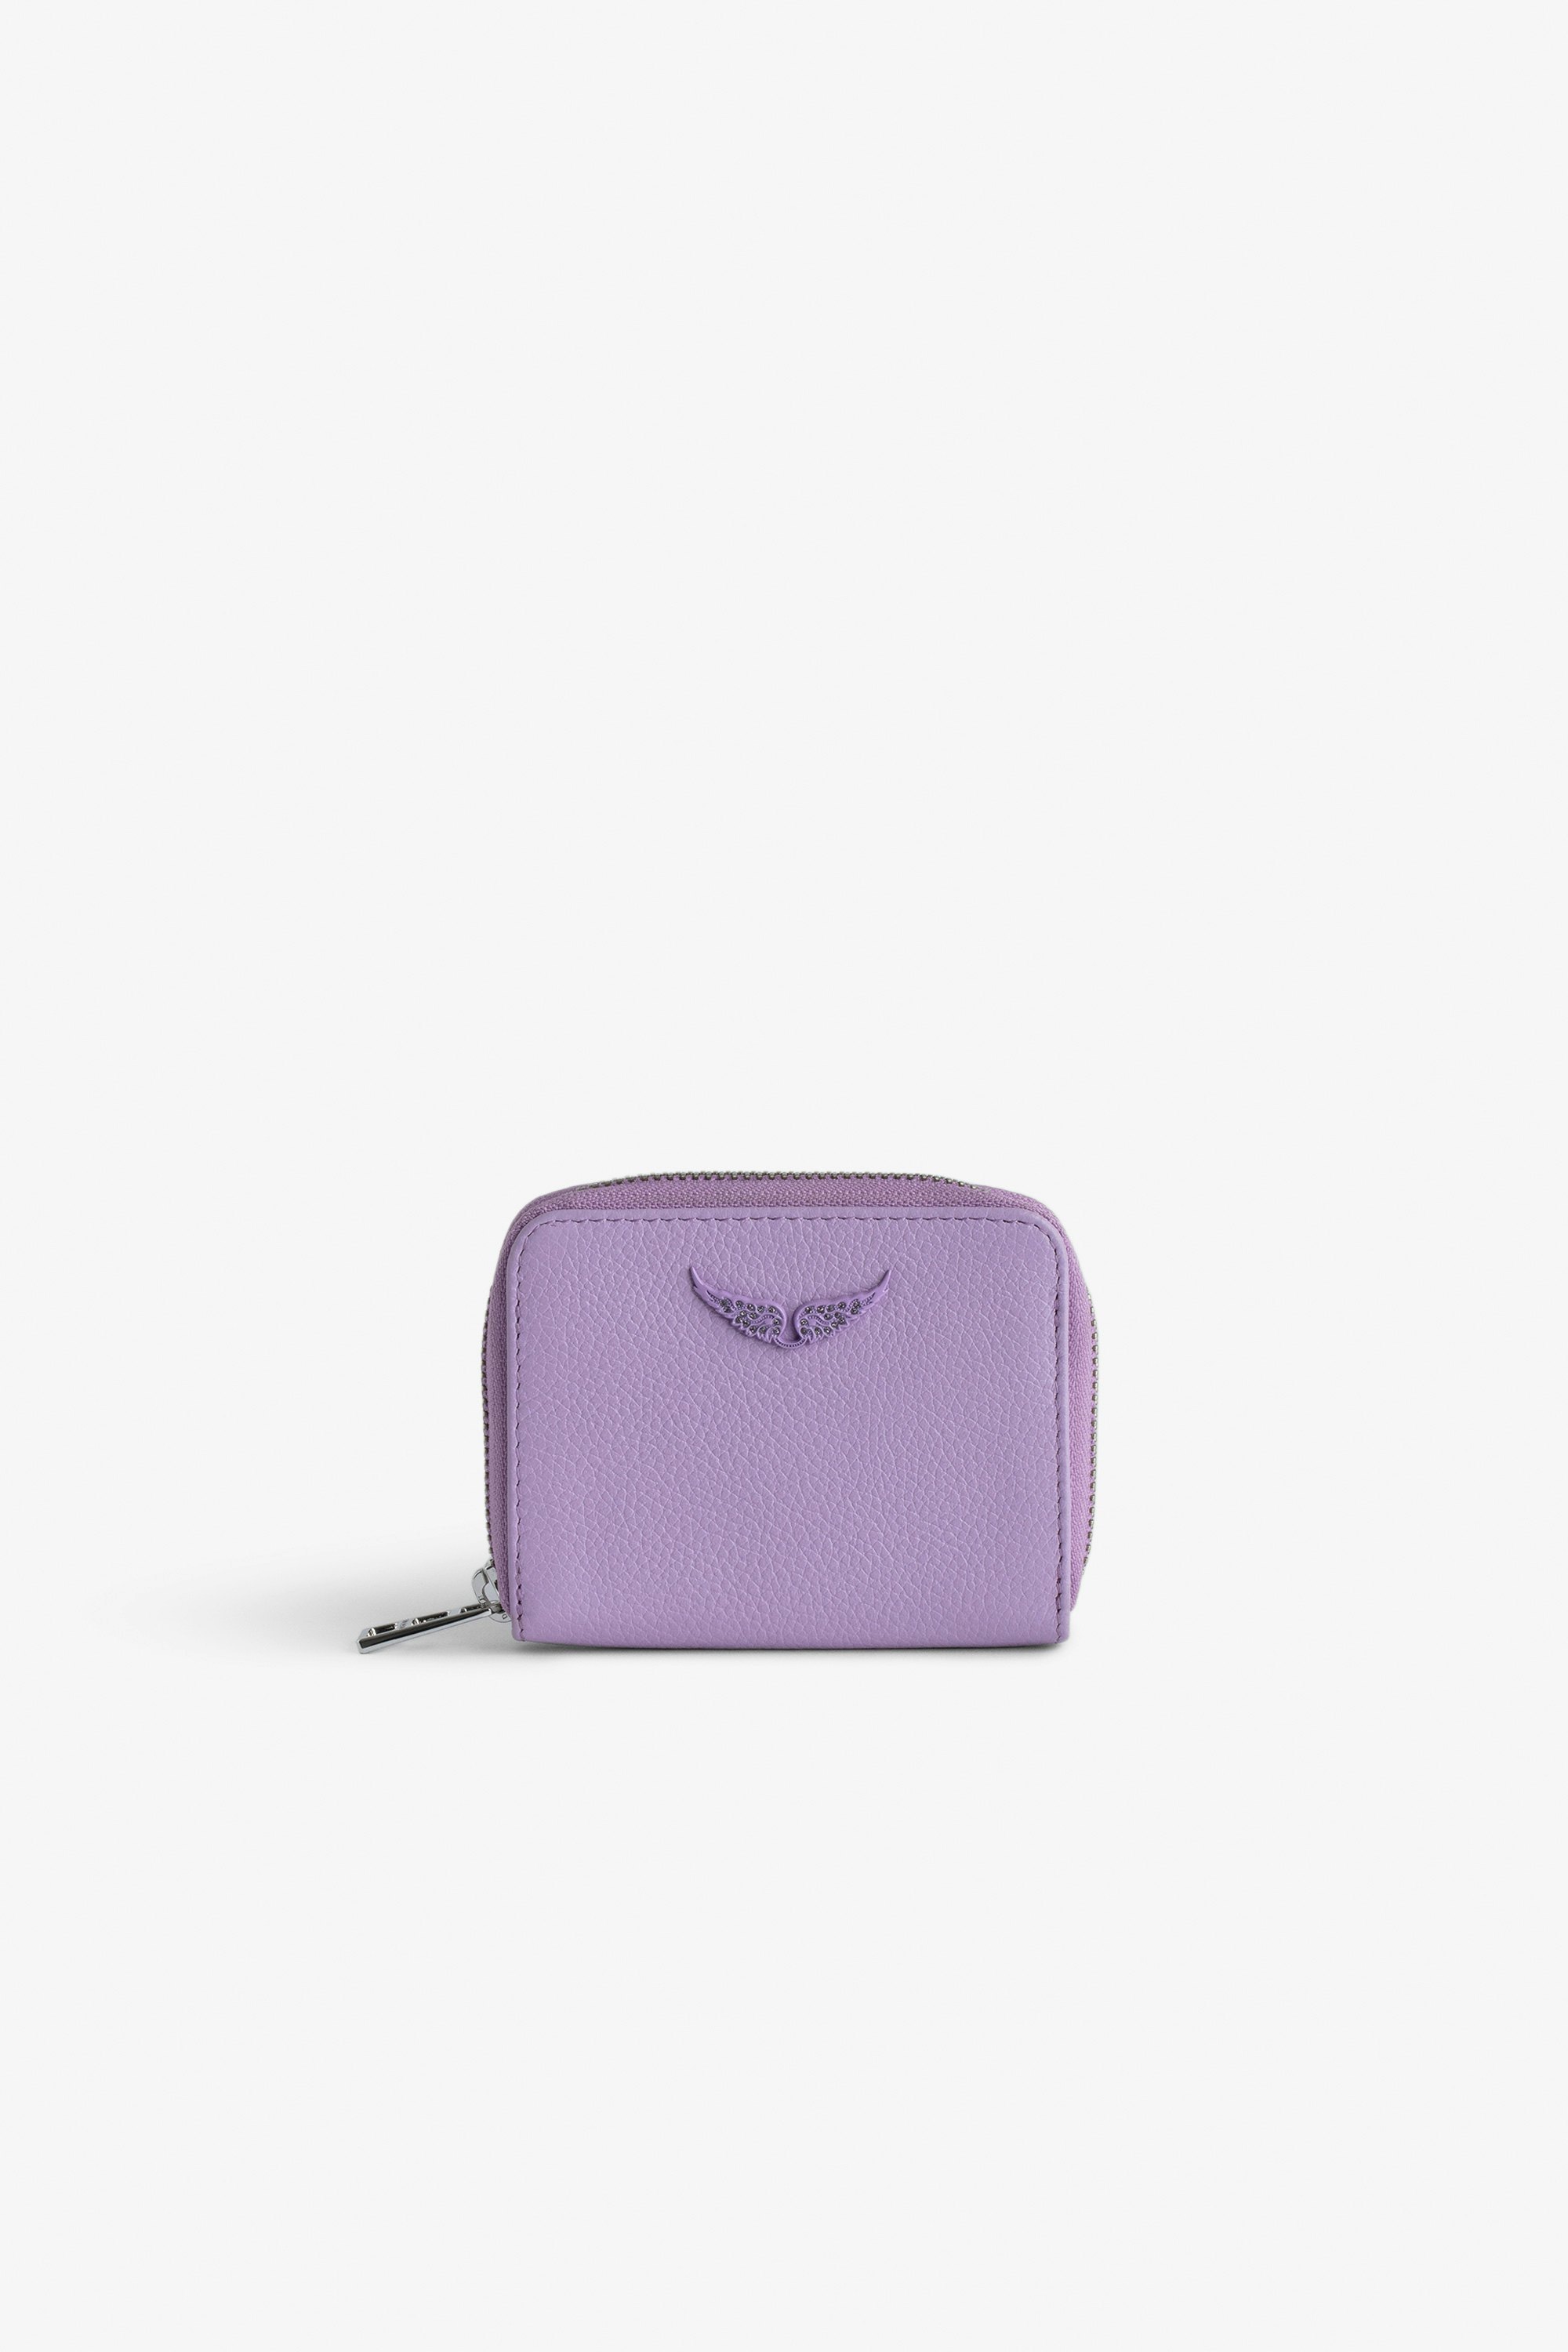 Mini ZV Coin Purse - Purple grained leather coin purse with diamanté wings charm.